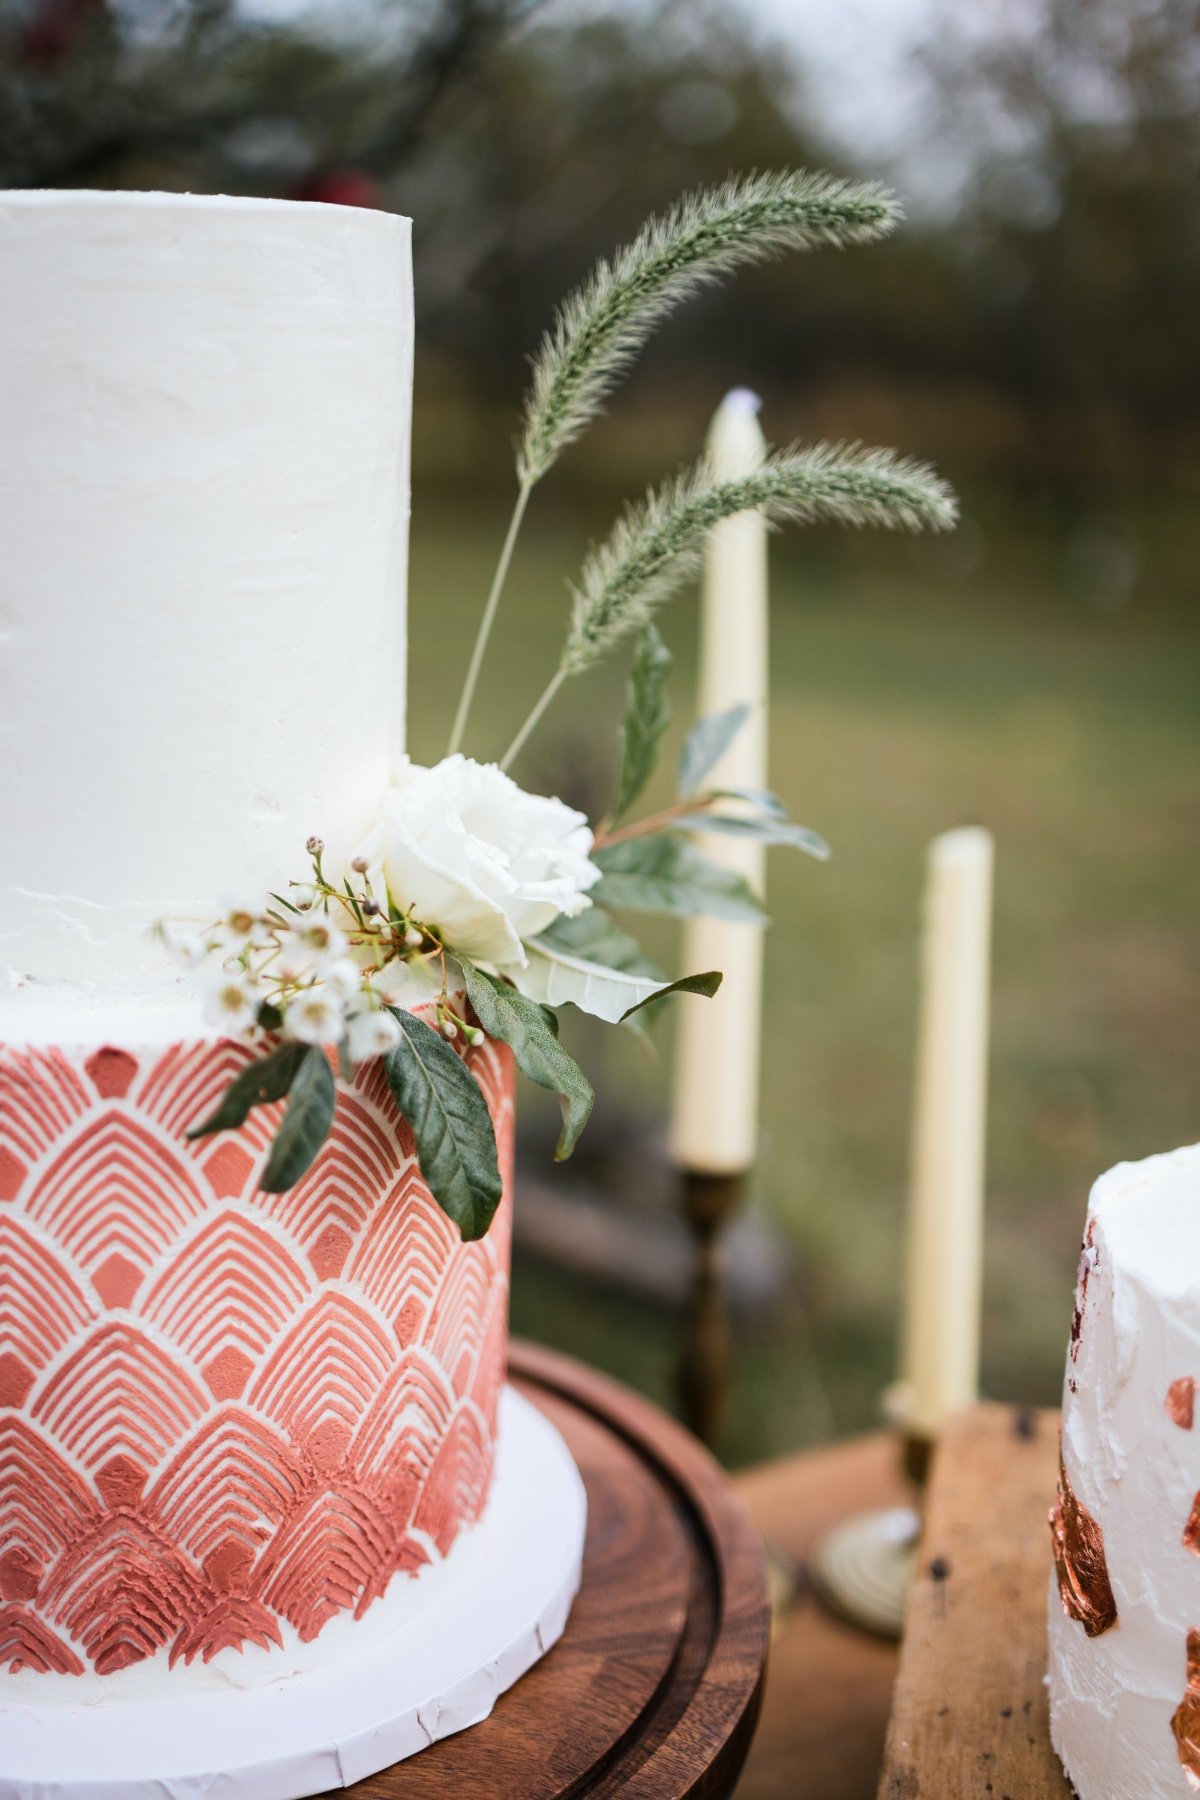 Rust colored chevron wedding cake by  Village Baking Co.